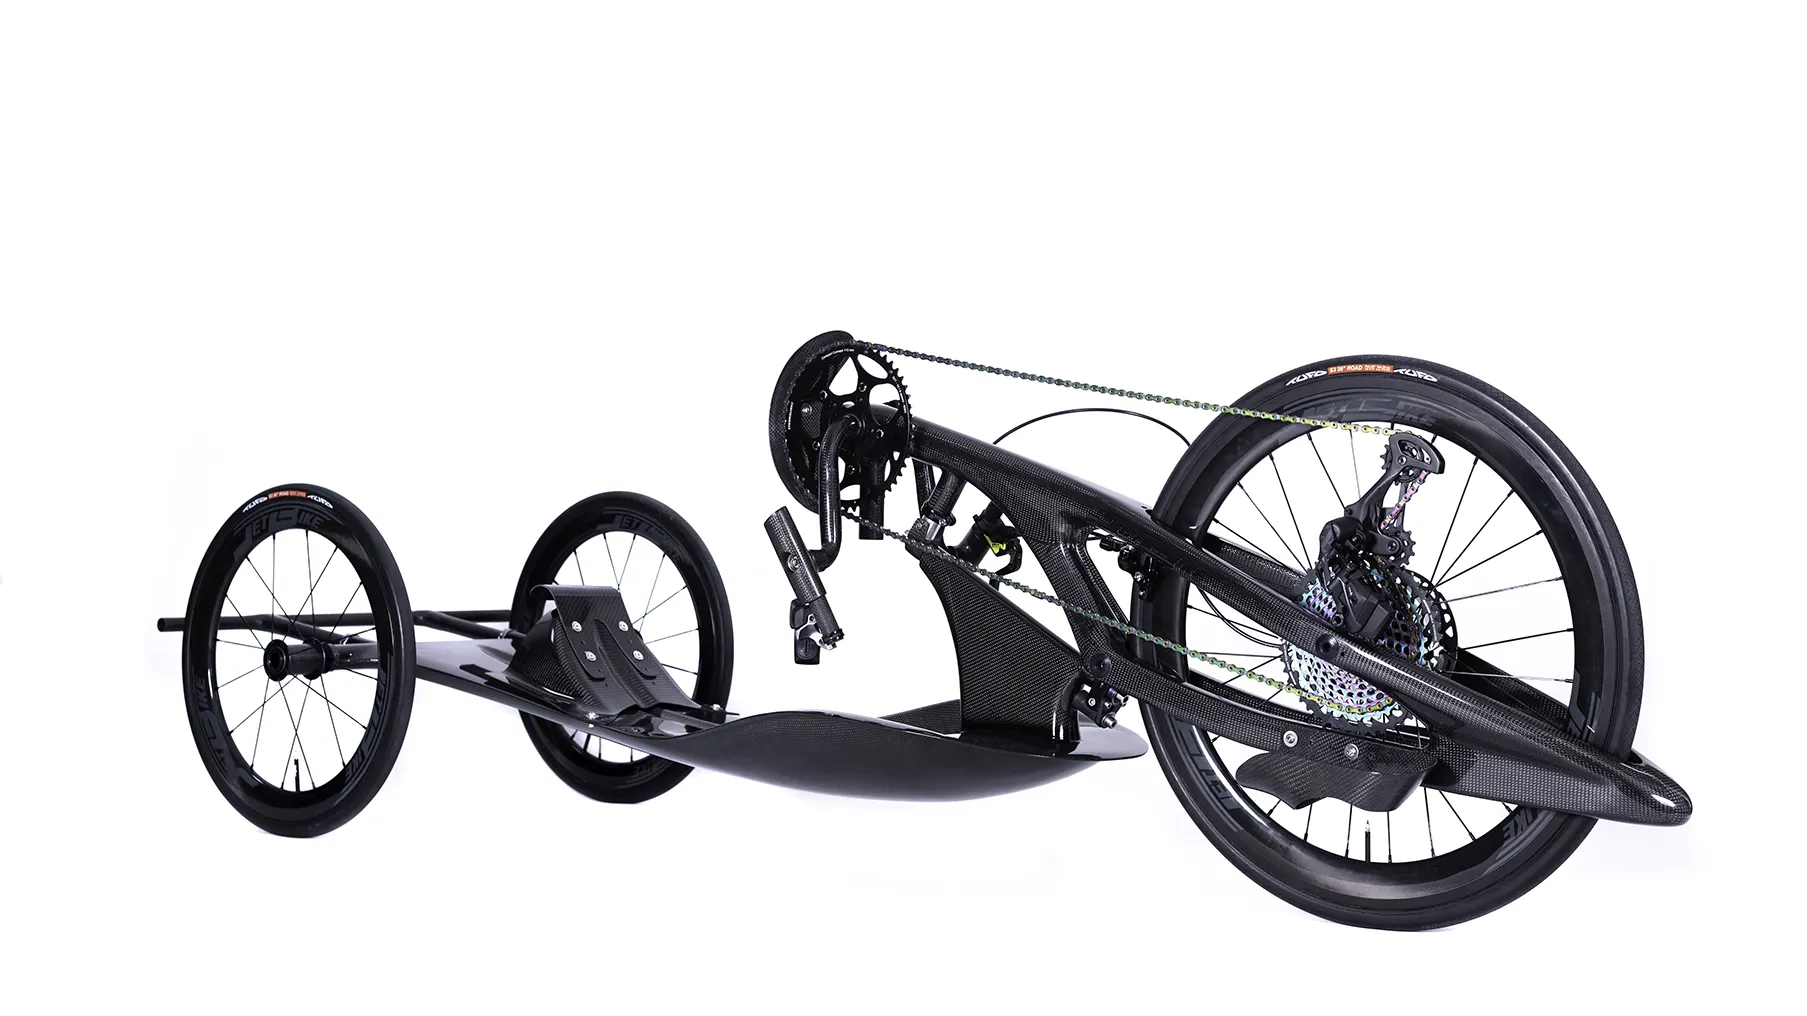 JetBike Alfa Duo with black carbon frame